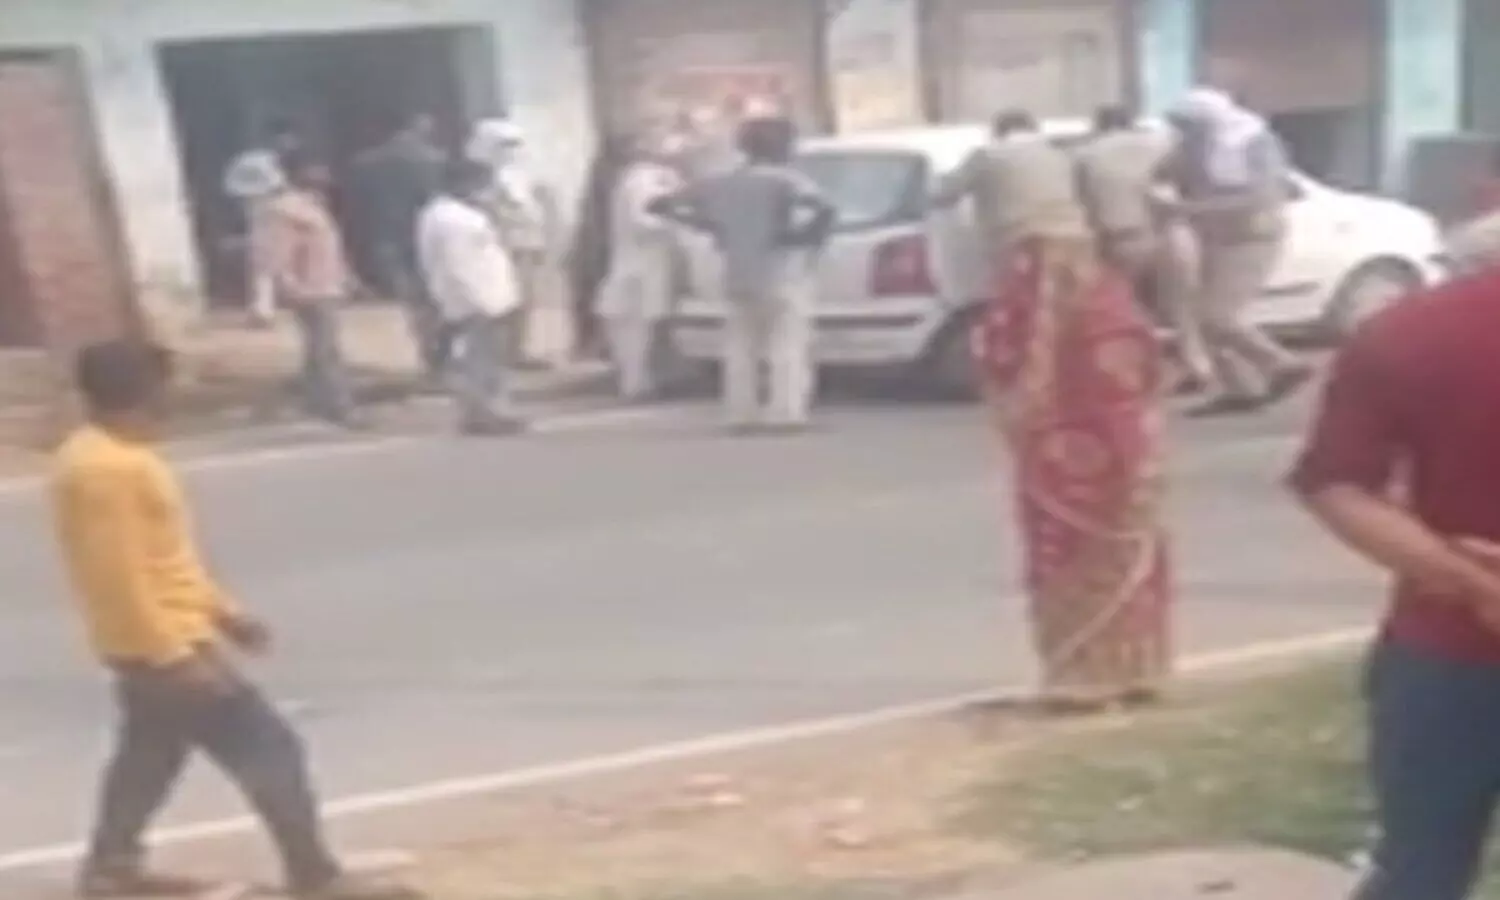 villagers Fighting with mainpuri police